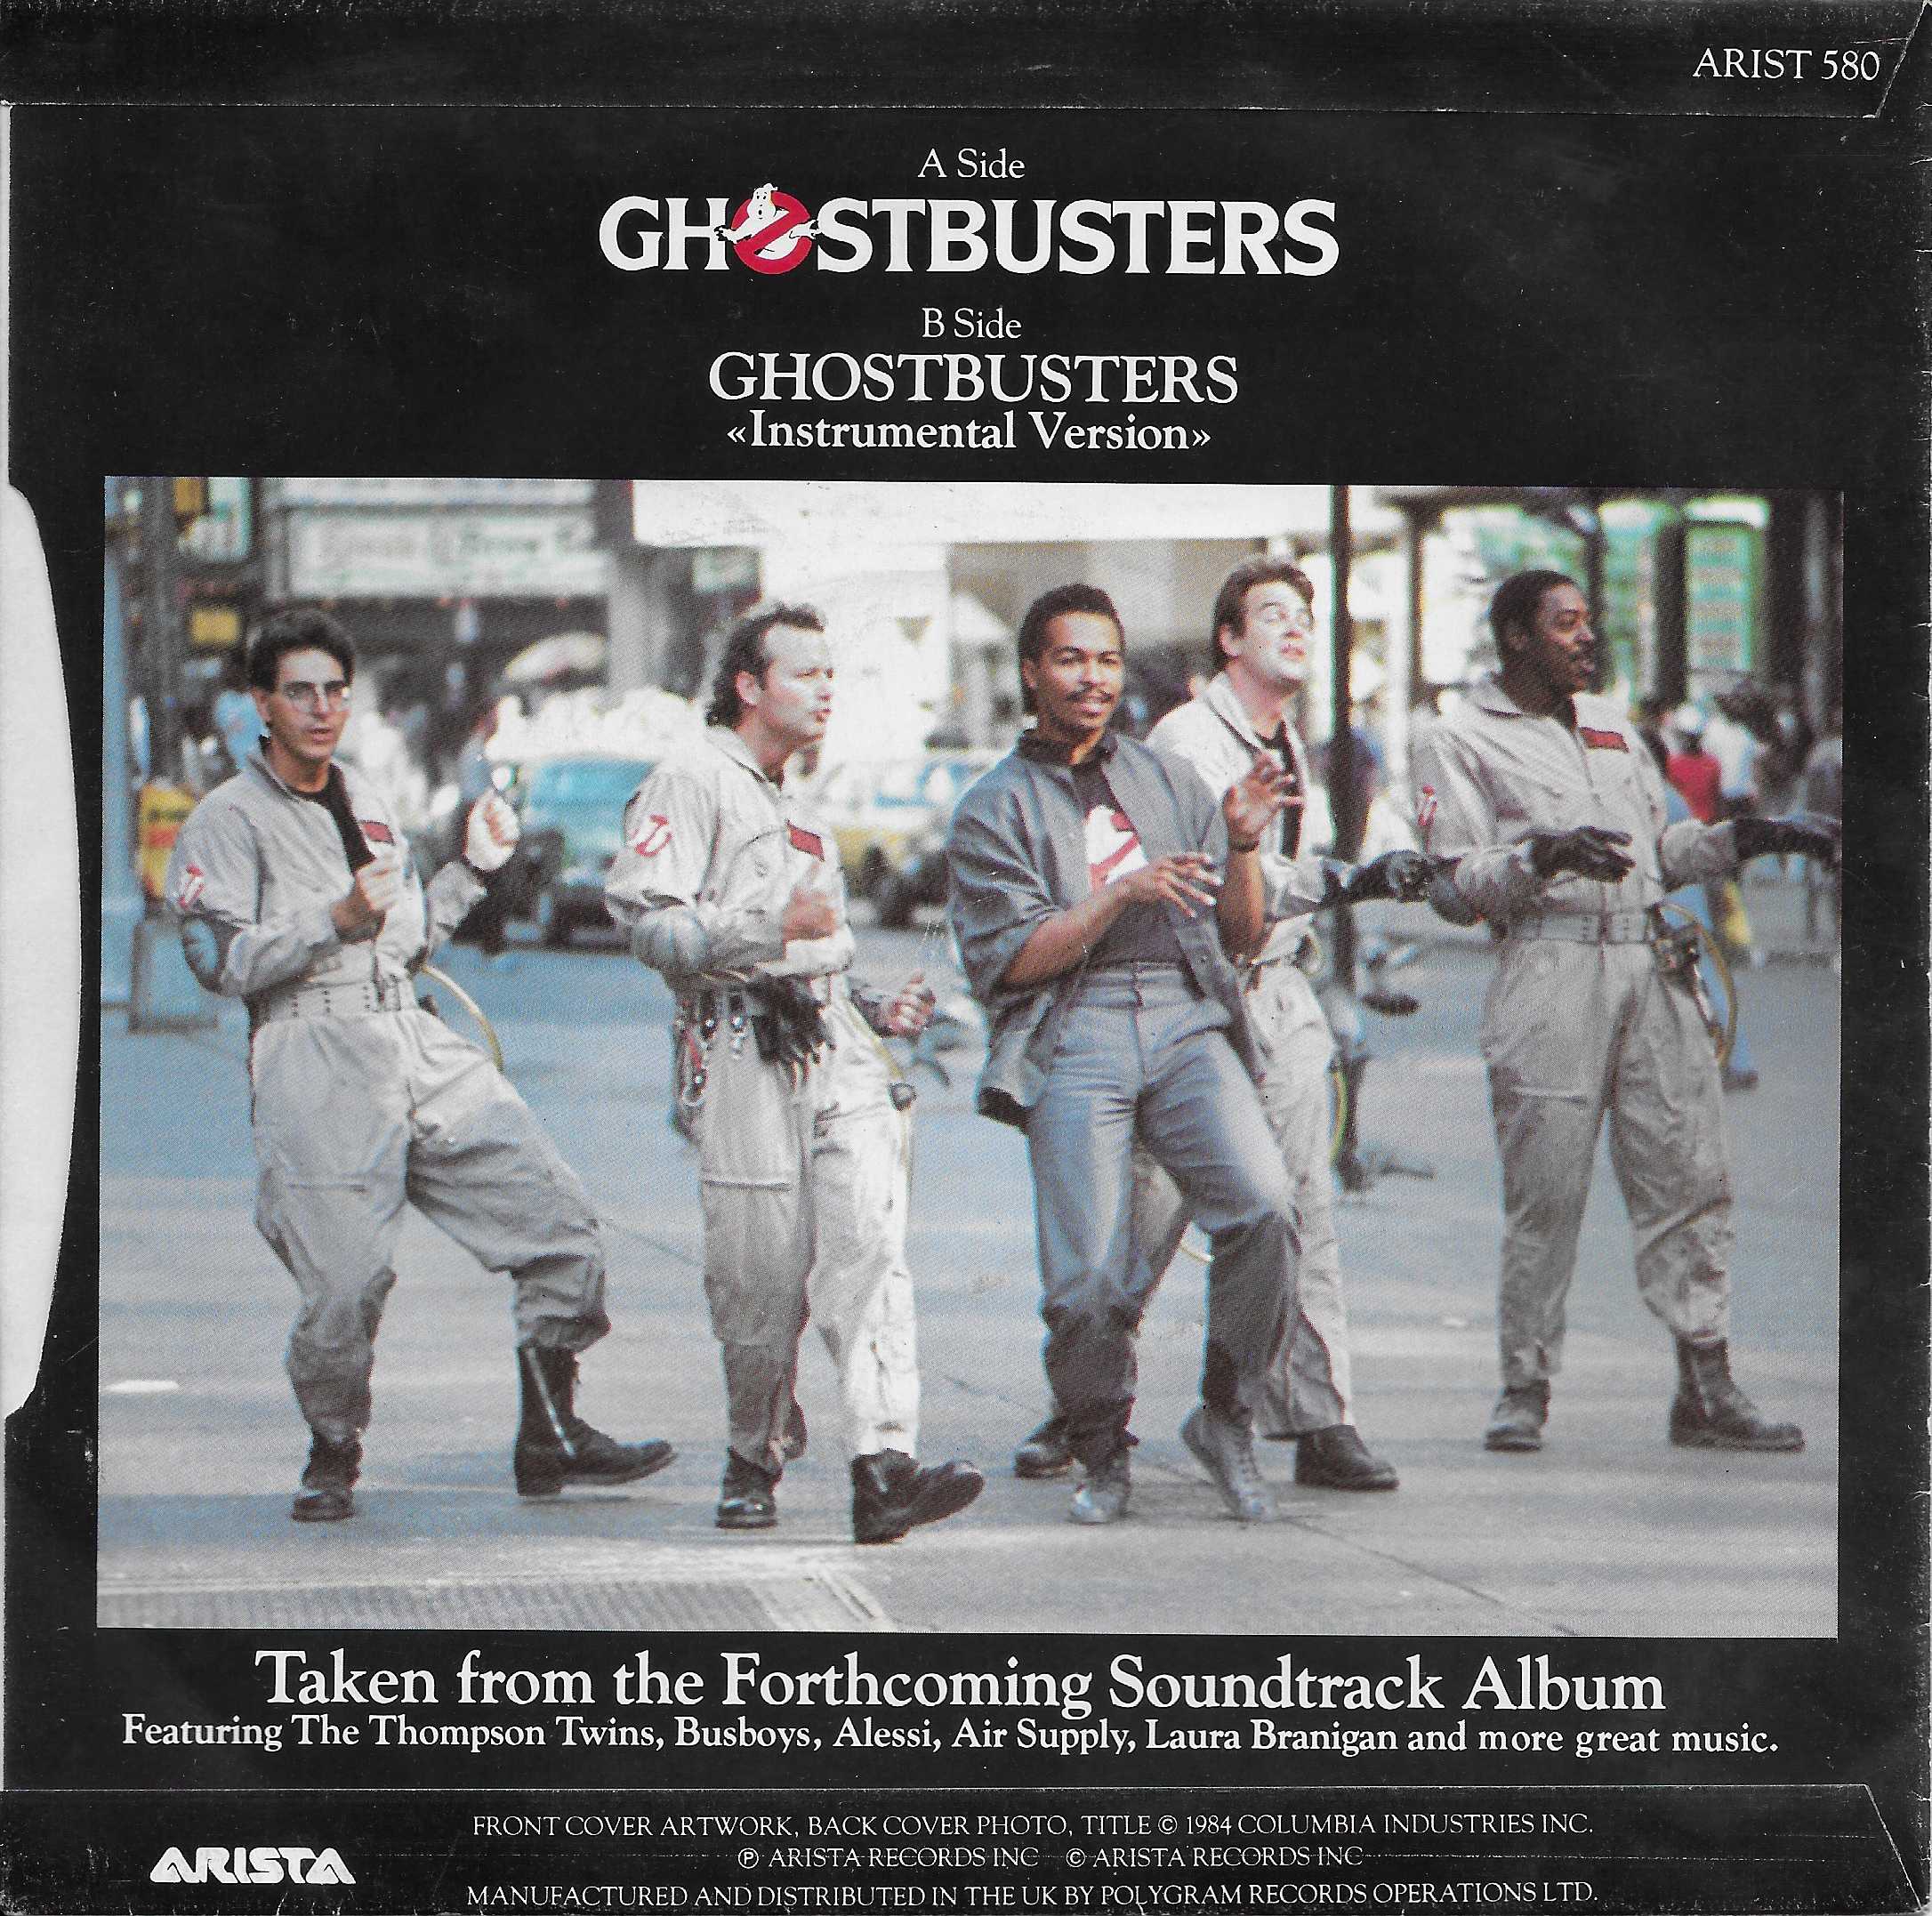 Picture of ARIST 580 Ghostbusters by artist Ray Parker Jnr. from ITV, Channel 4 and Channel 5 library